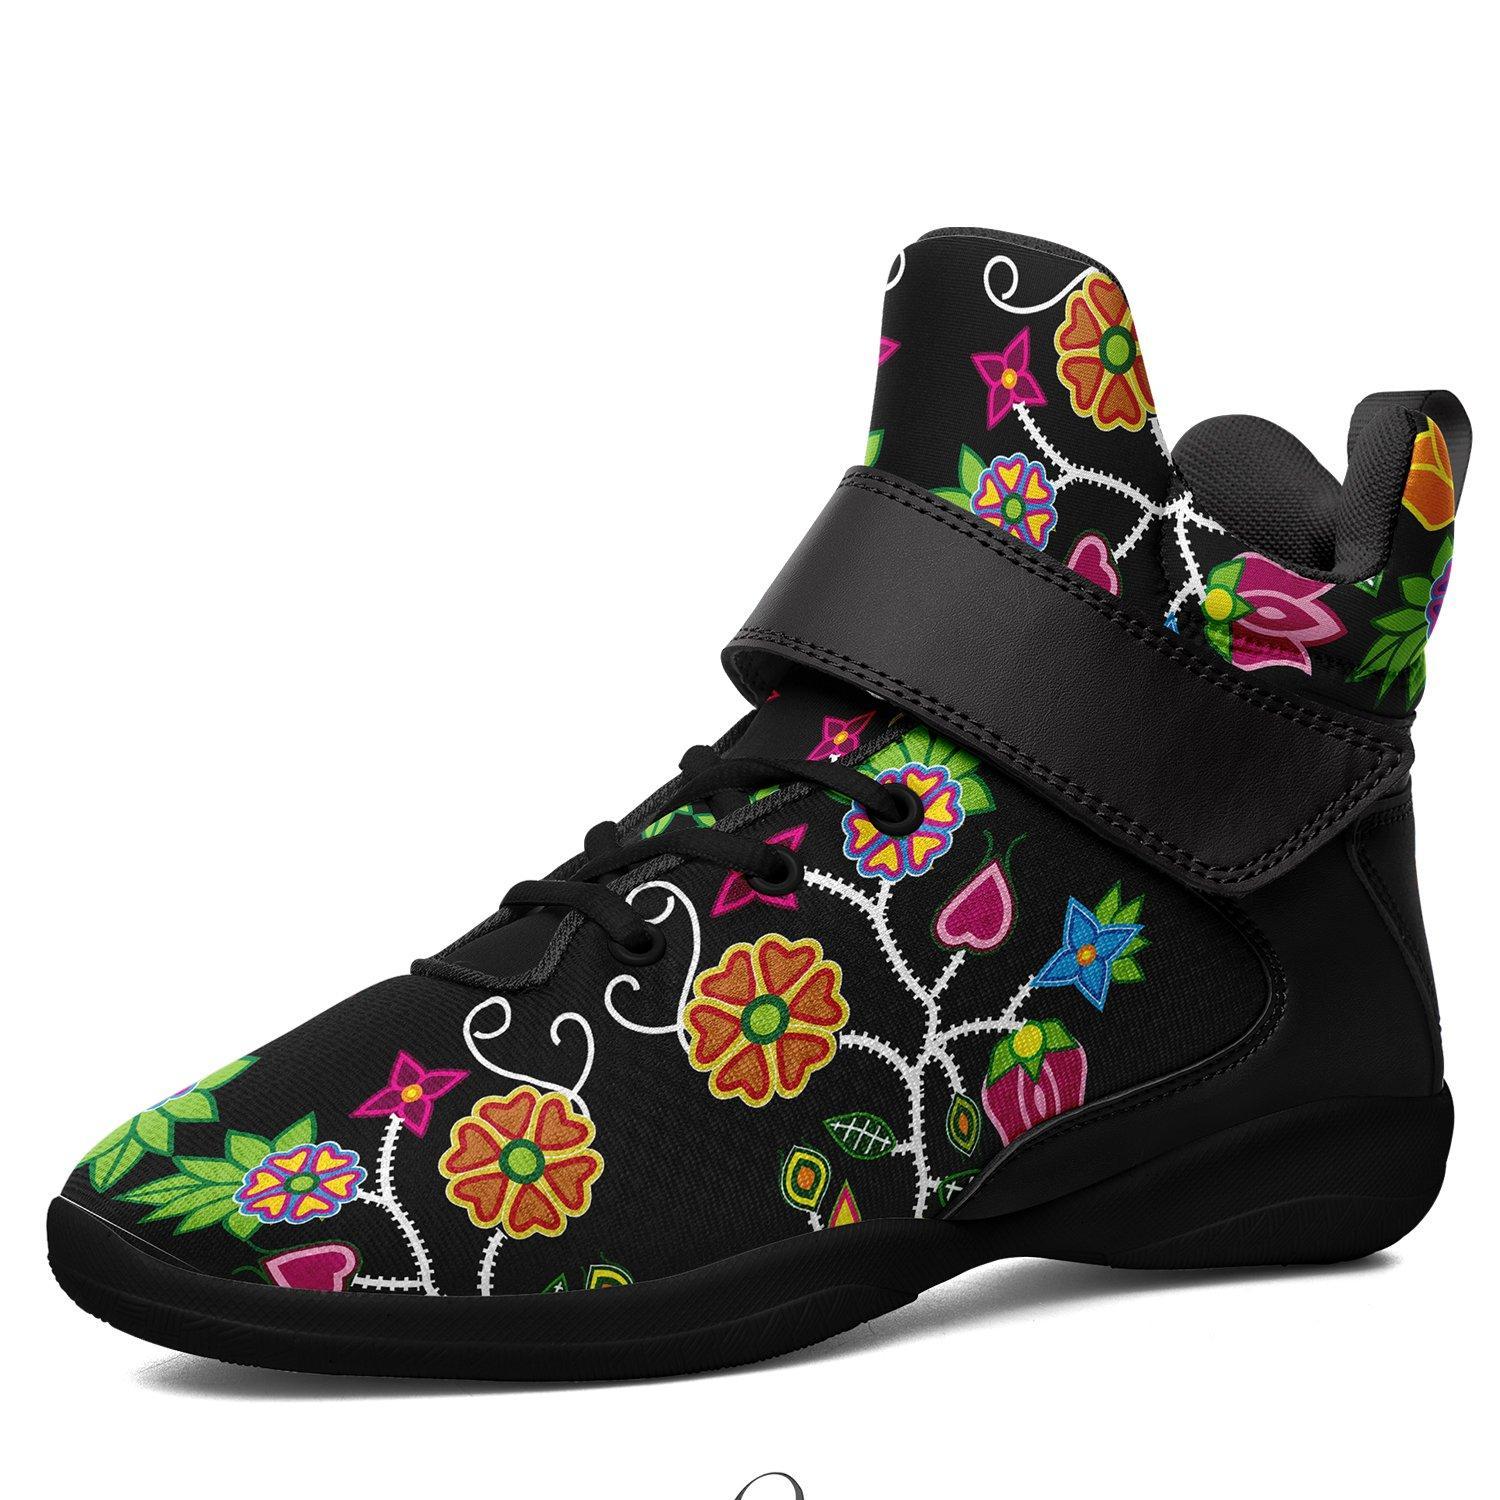 Floral Beadwork Kid's Ipottaa Basketball / Sport High Top Shoes 49 Dzine US Child 12.5 / EUR 30 Black Sole with Black Strap 